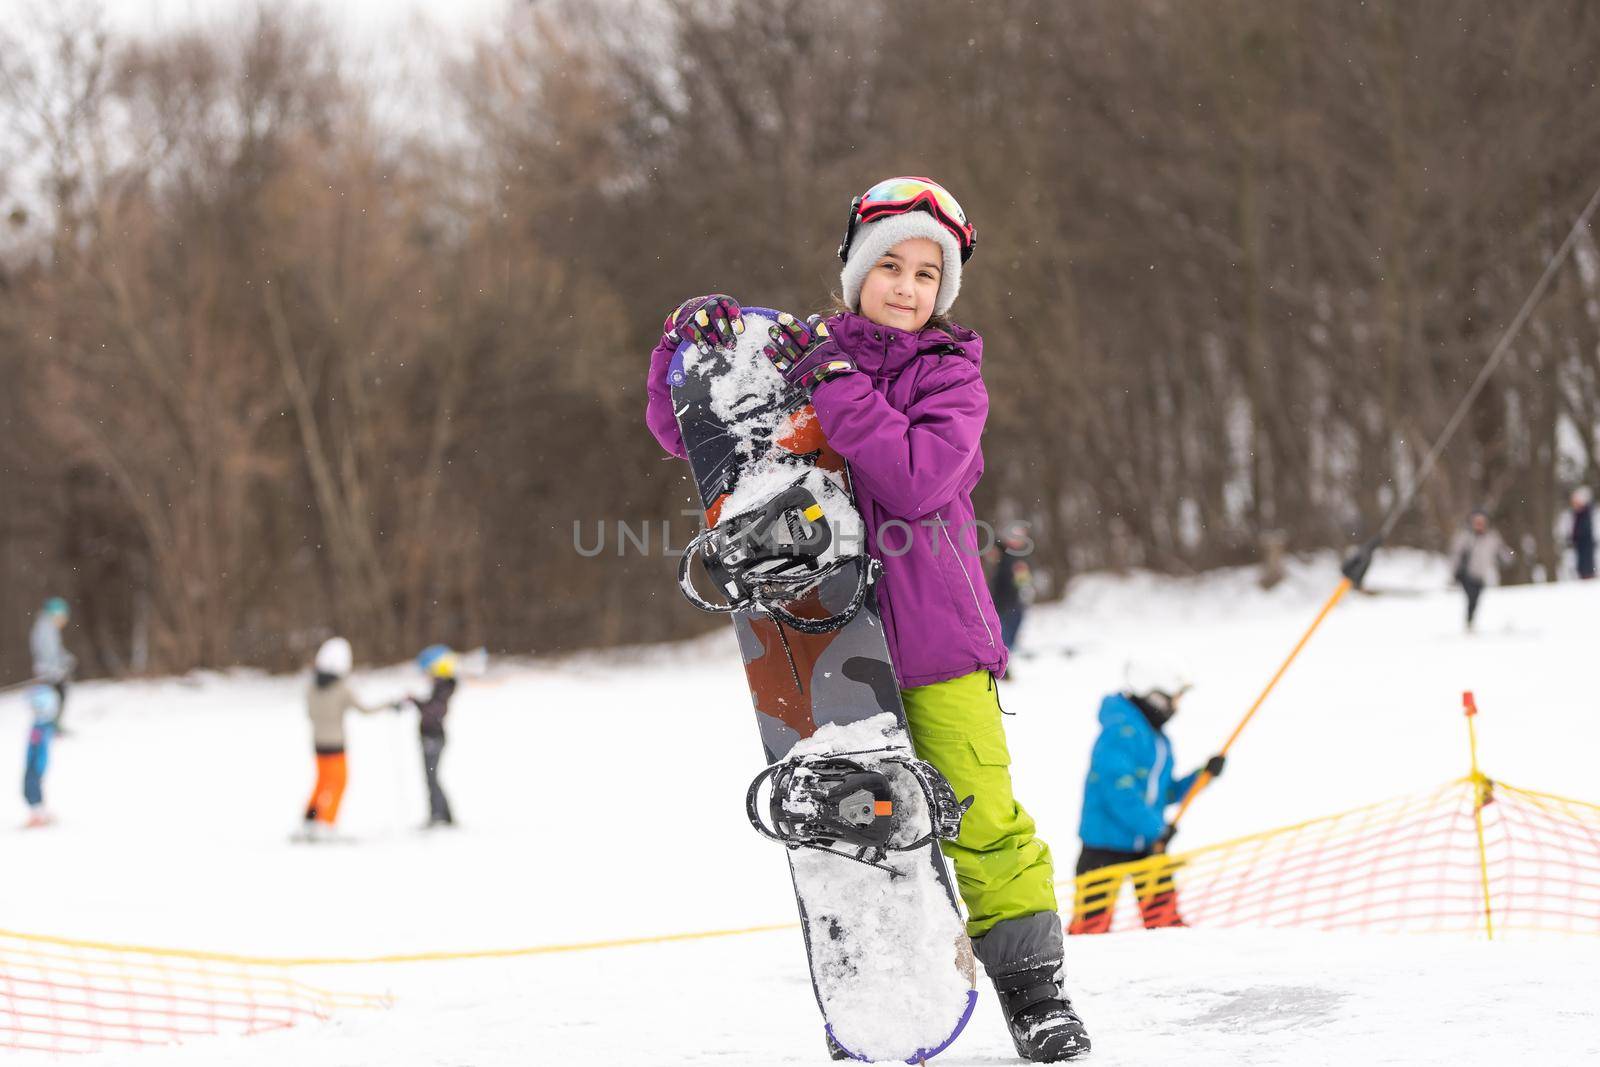 little cute girl learning to ride a children's snowboard, winter sports for the child, safety of active sports. by Andelov13